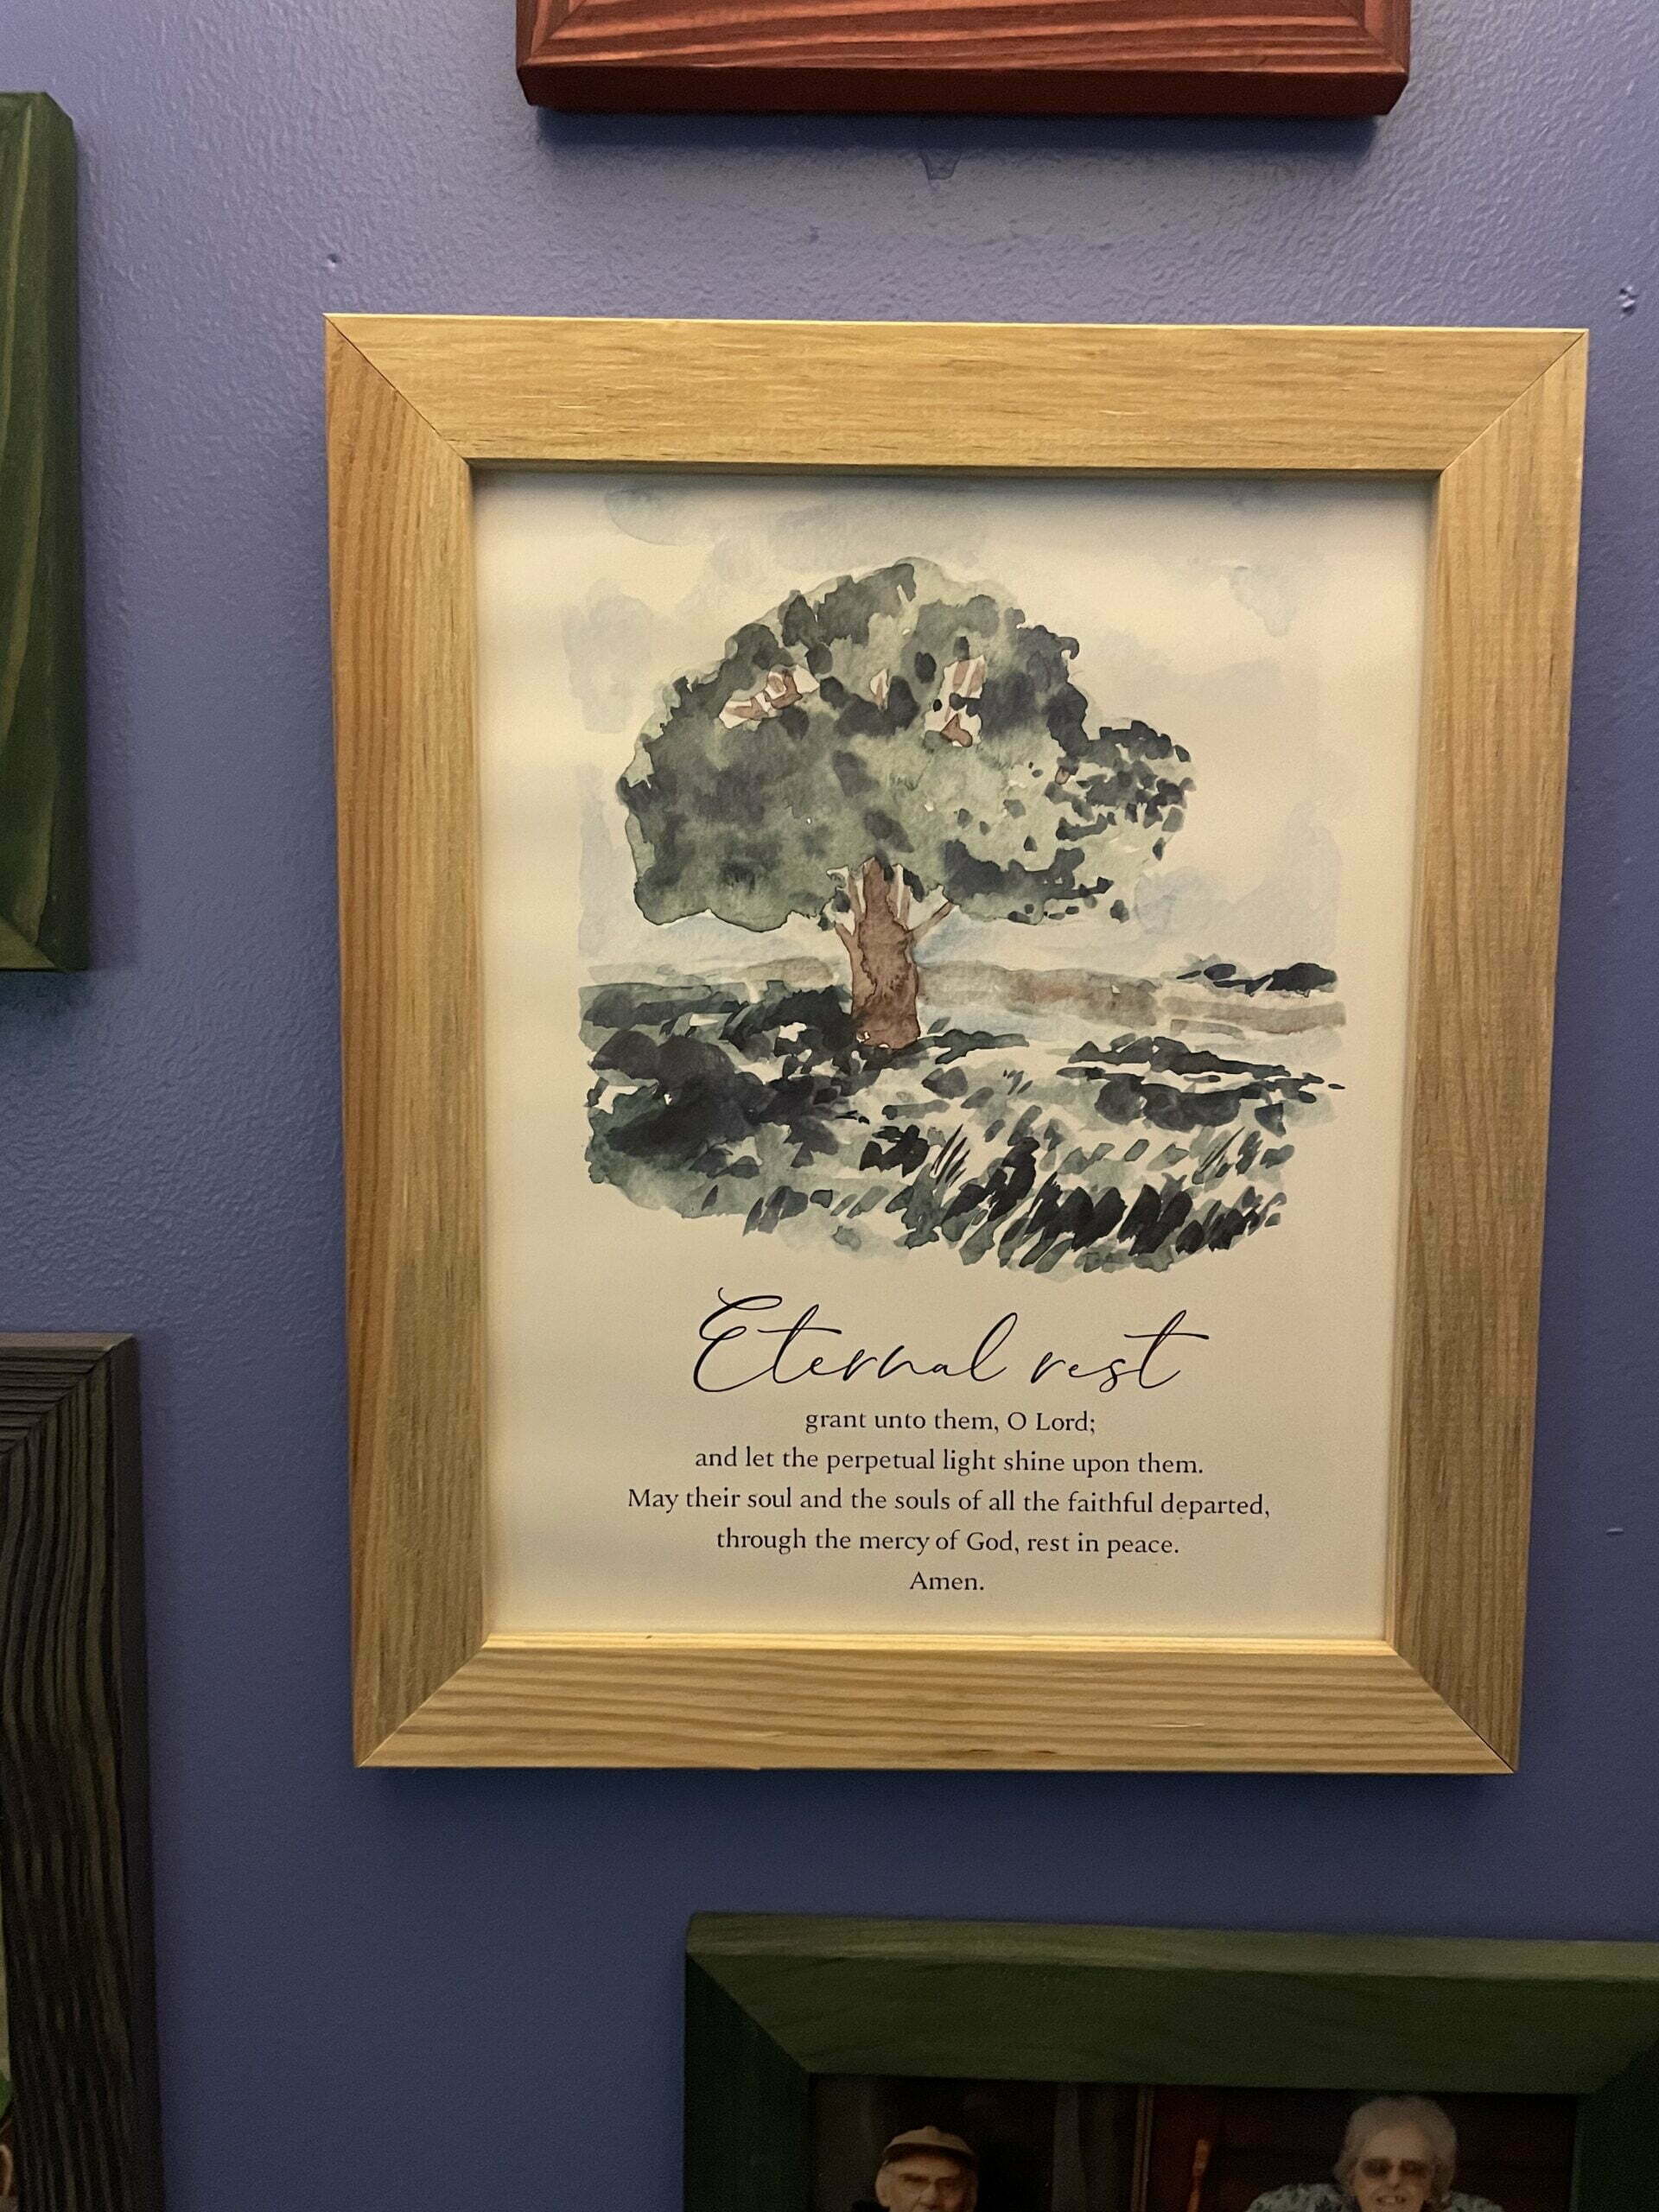 Framed watercolor with "eternal rest" prayer